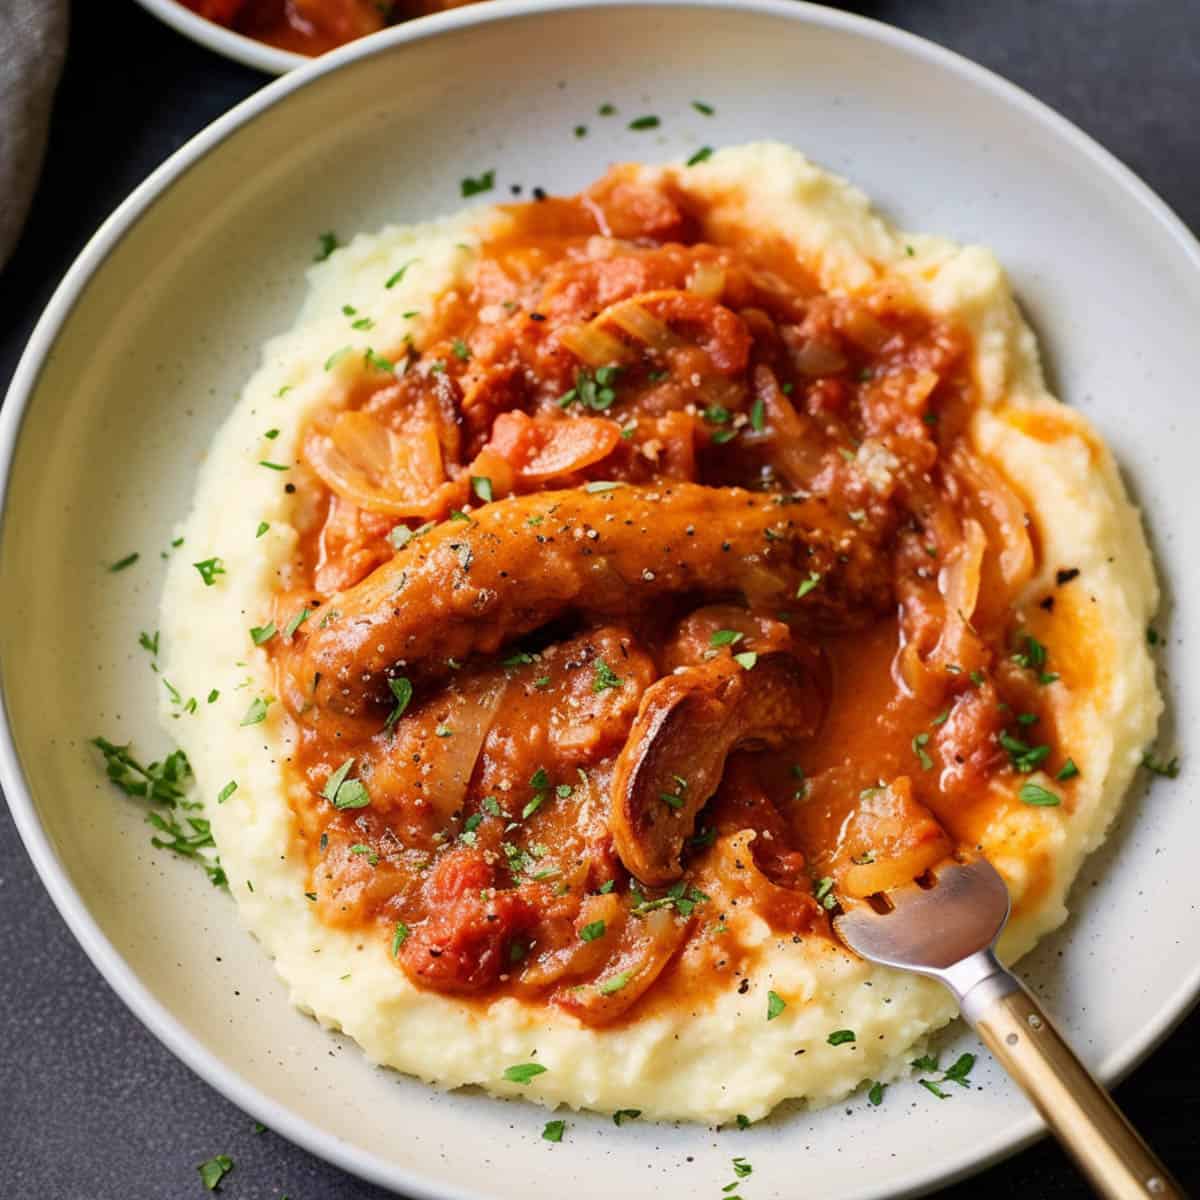 Slow cooker sausage casserole over mashed potatoes with mushrooms and peppers.